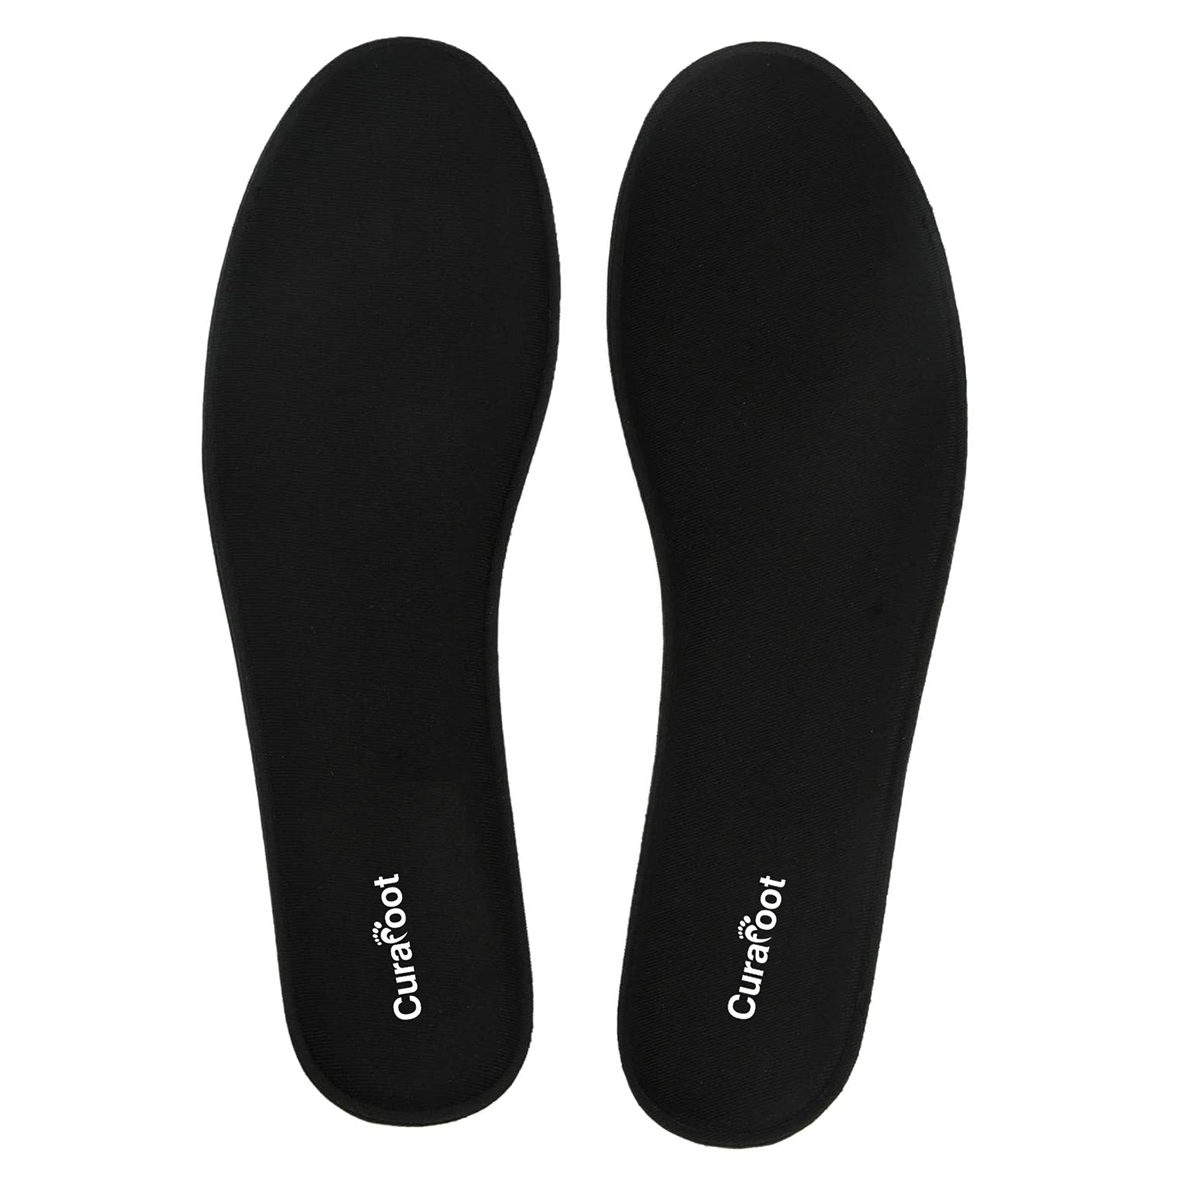 Memory Foam Shoe Insole for Sports and Running